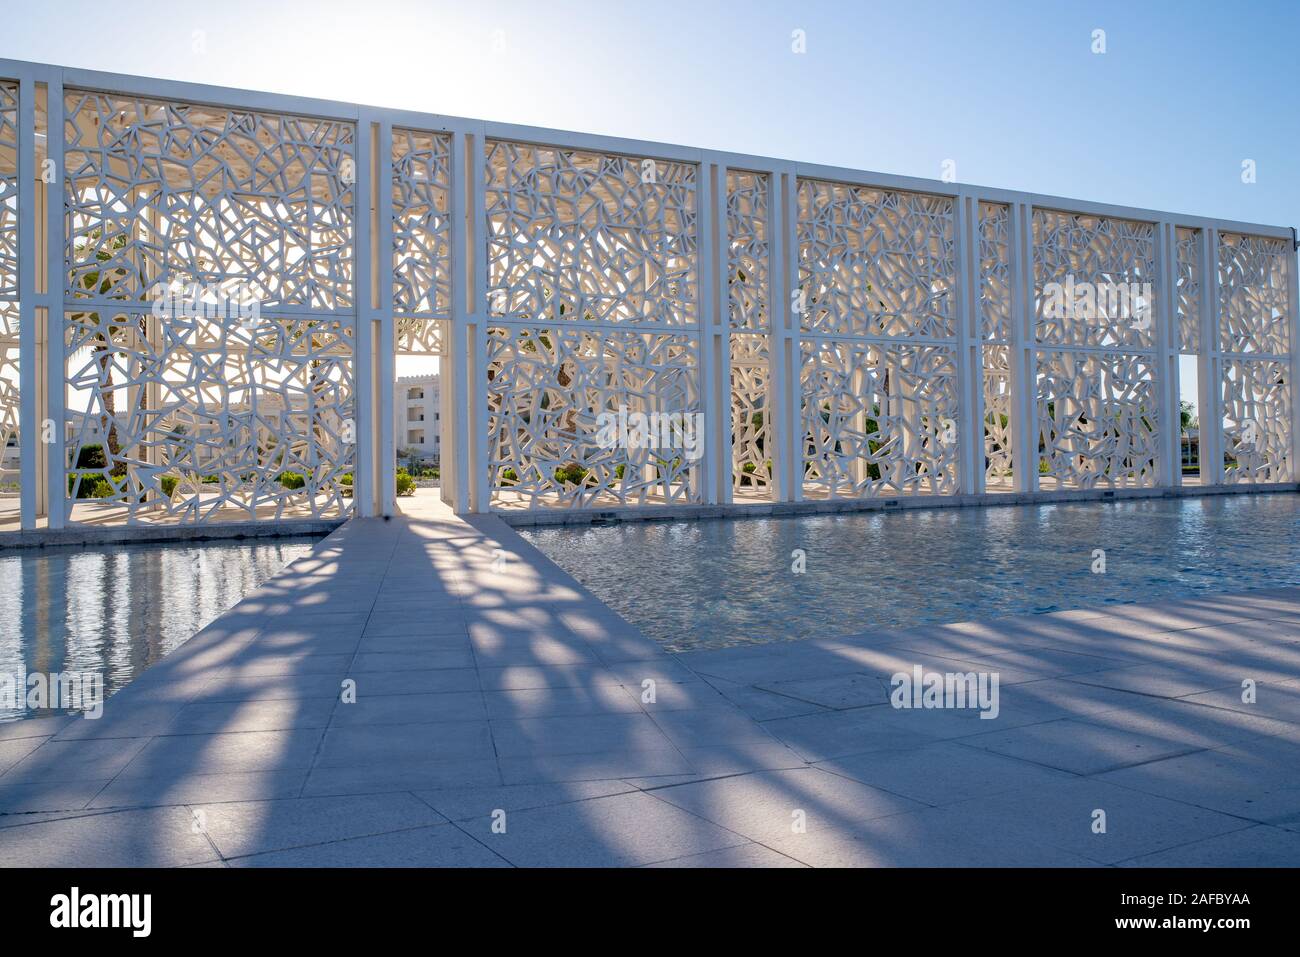 Doha, Qatar - May 26, 2017: Detail of the Ceremonial Court, Education City, designed by Arata Isozaki architects, taken during a late spring afternoon Stock Photo